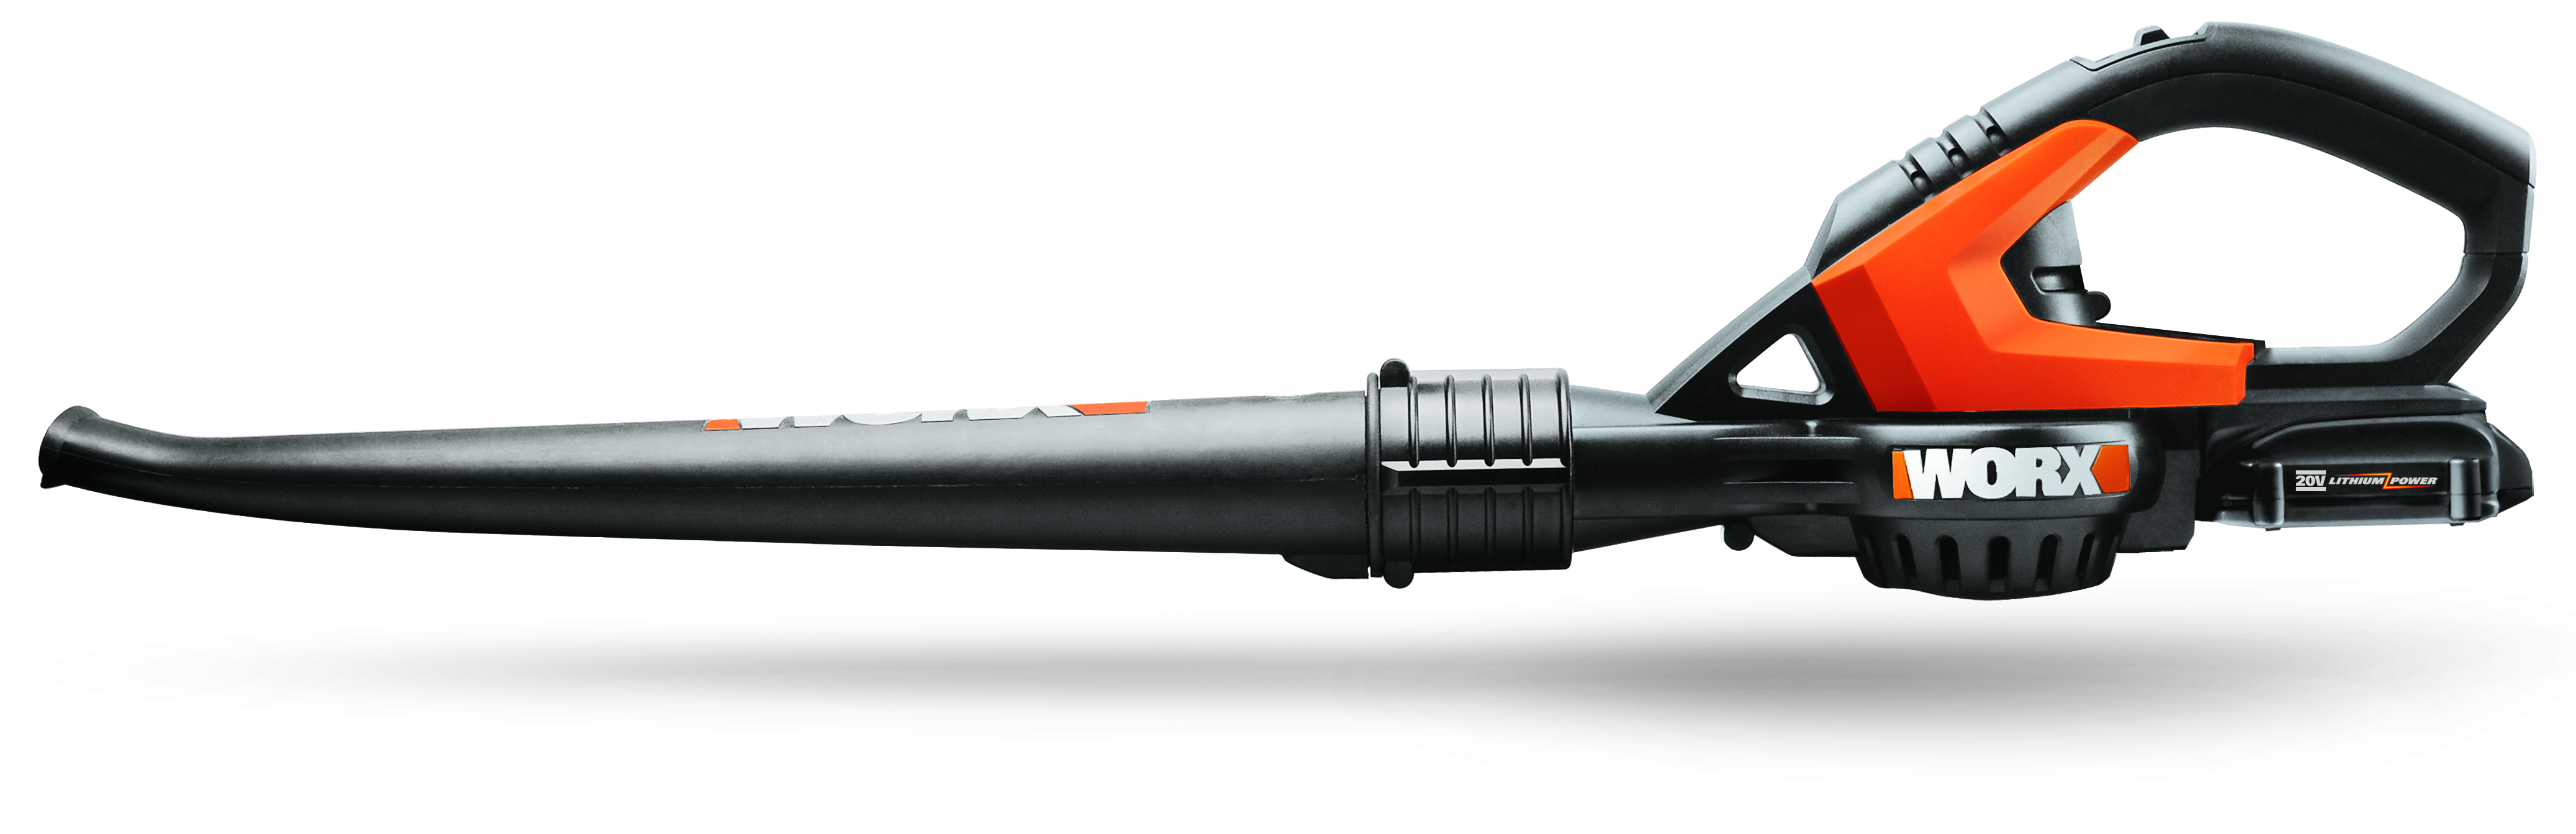 WORX 20V MaxLithium Blower/Sweeper weighs only 3.5 lbs. and develops air speed up to 120 mph.